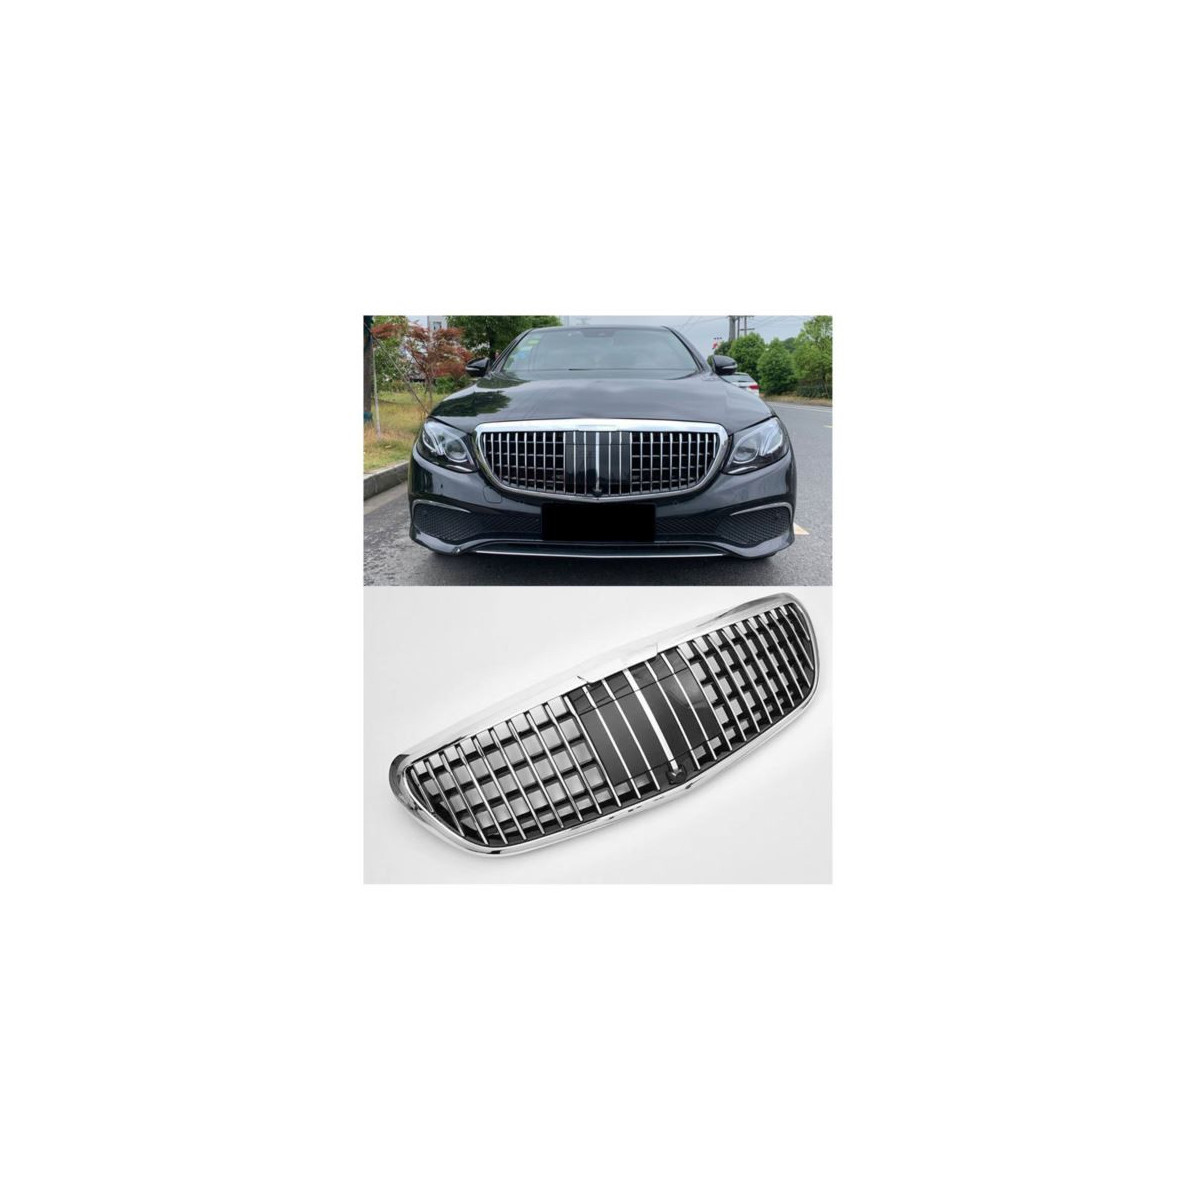 GRILL MERCEDES W213 17-20 EXCLISIVE IN MAYBACH